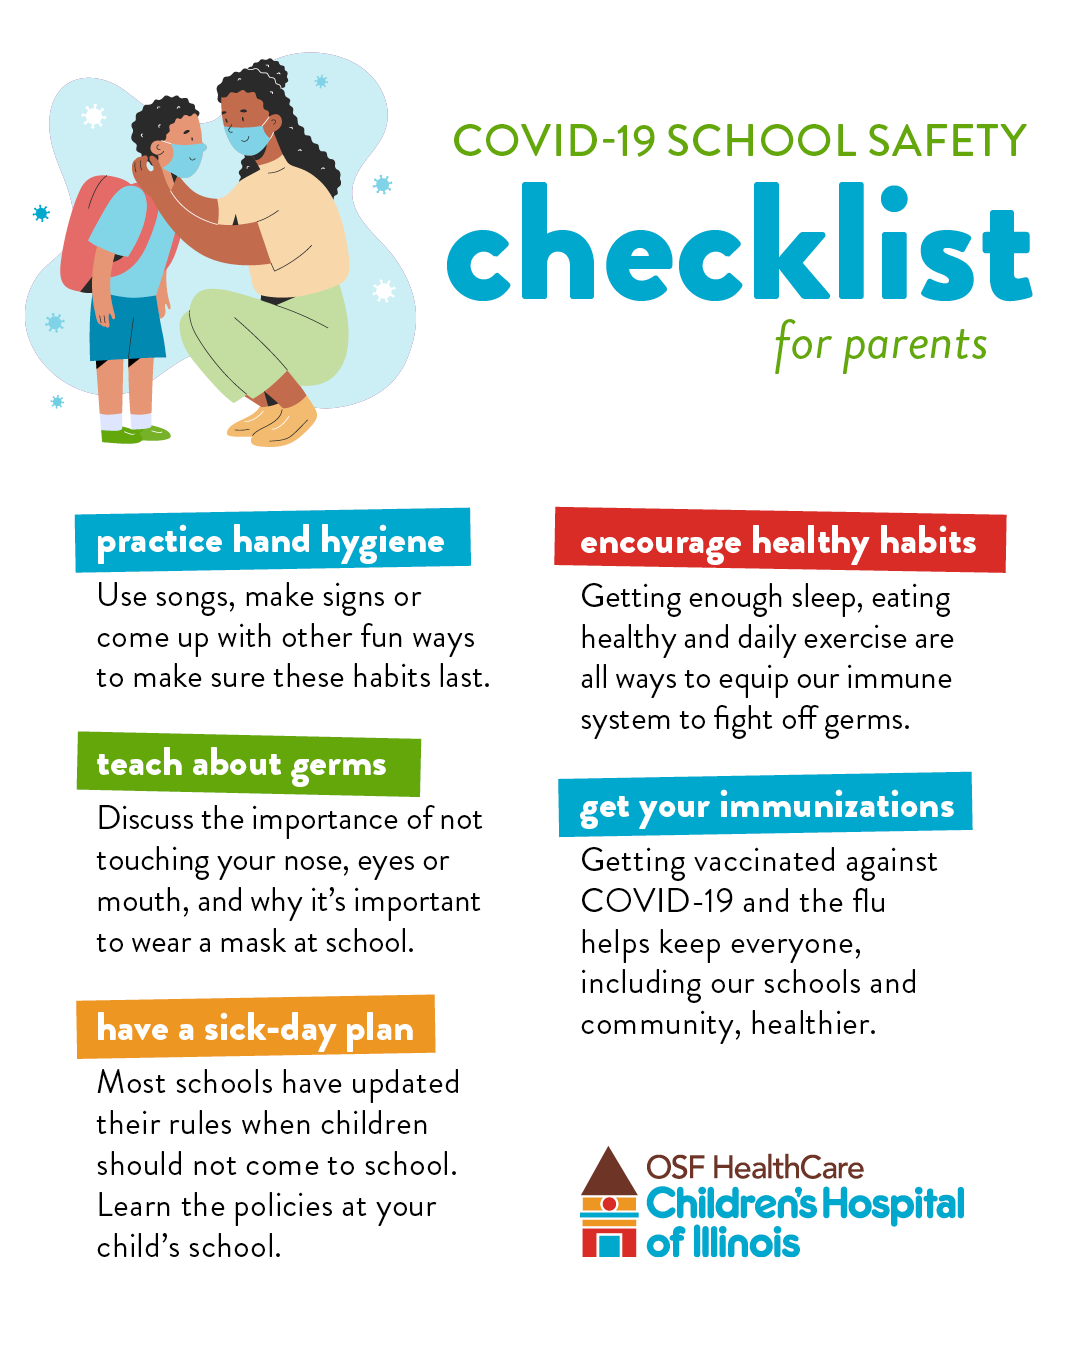 COVID-19 safety checklist for parents - infographic